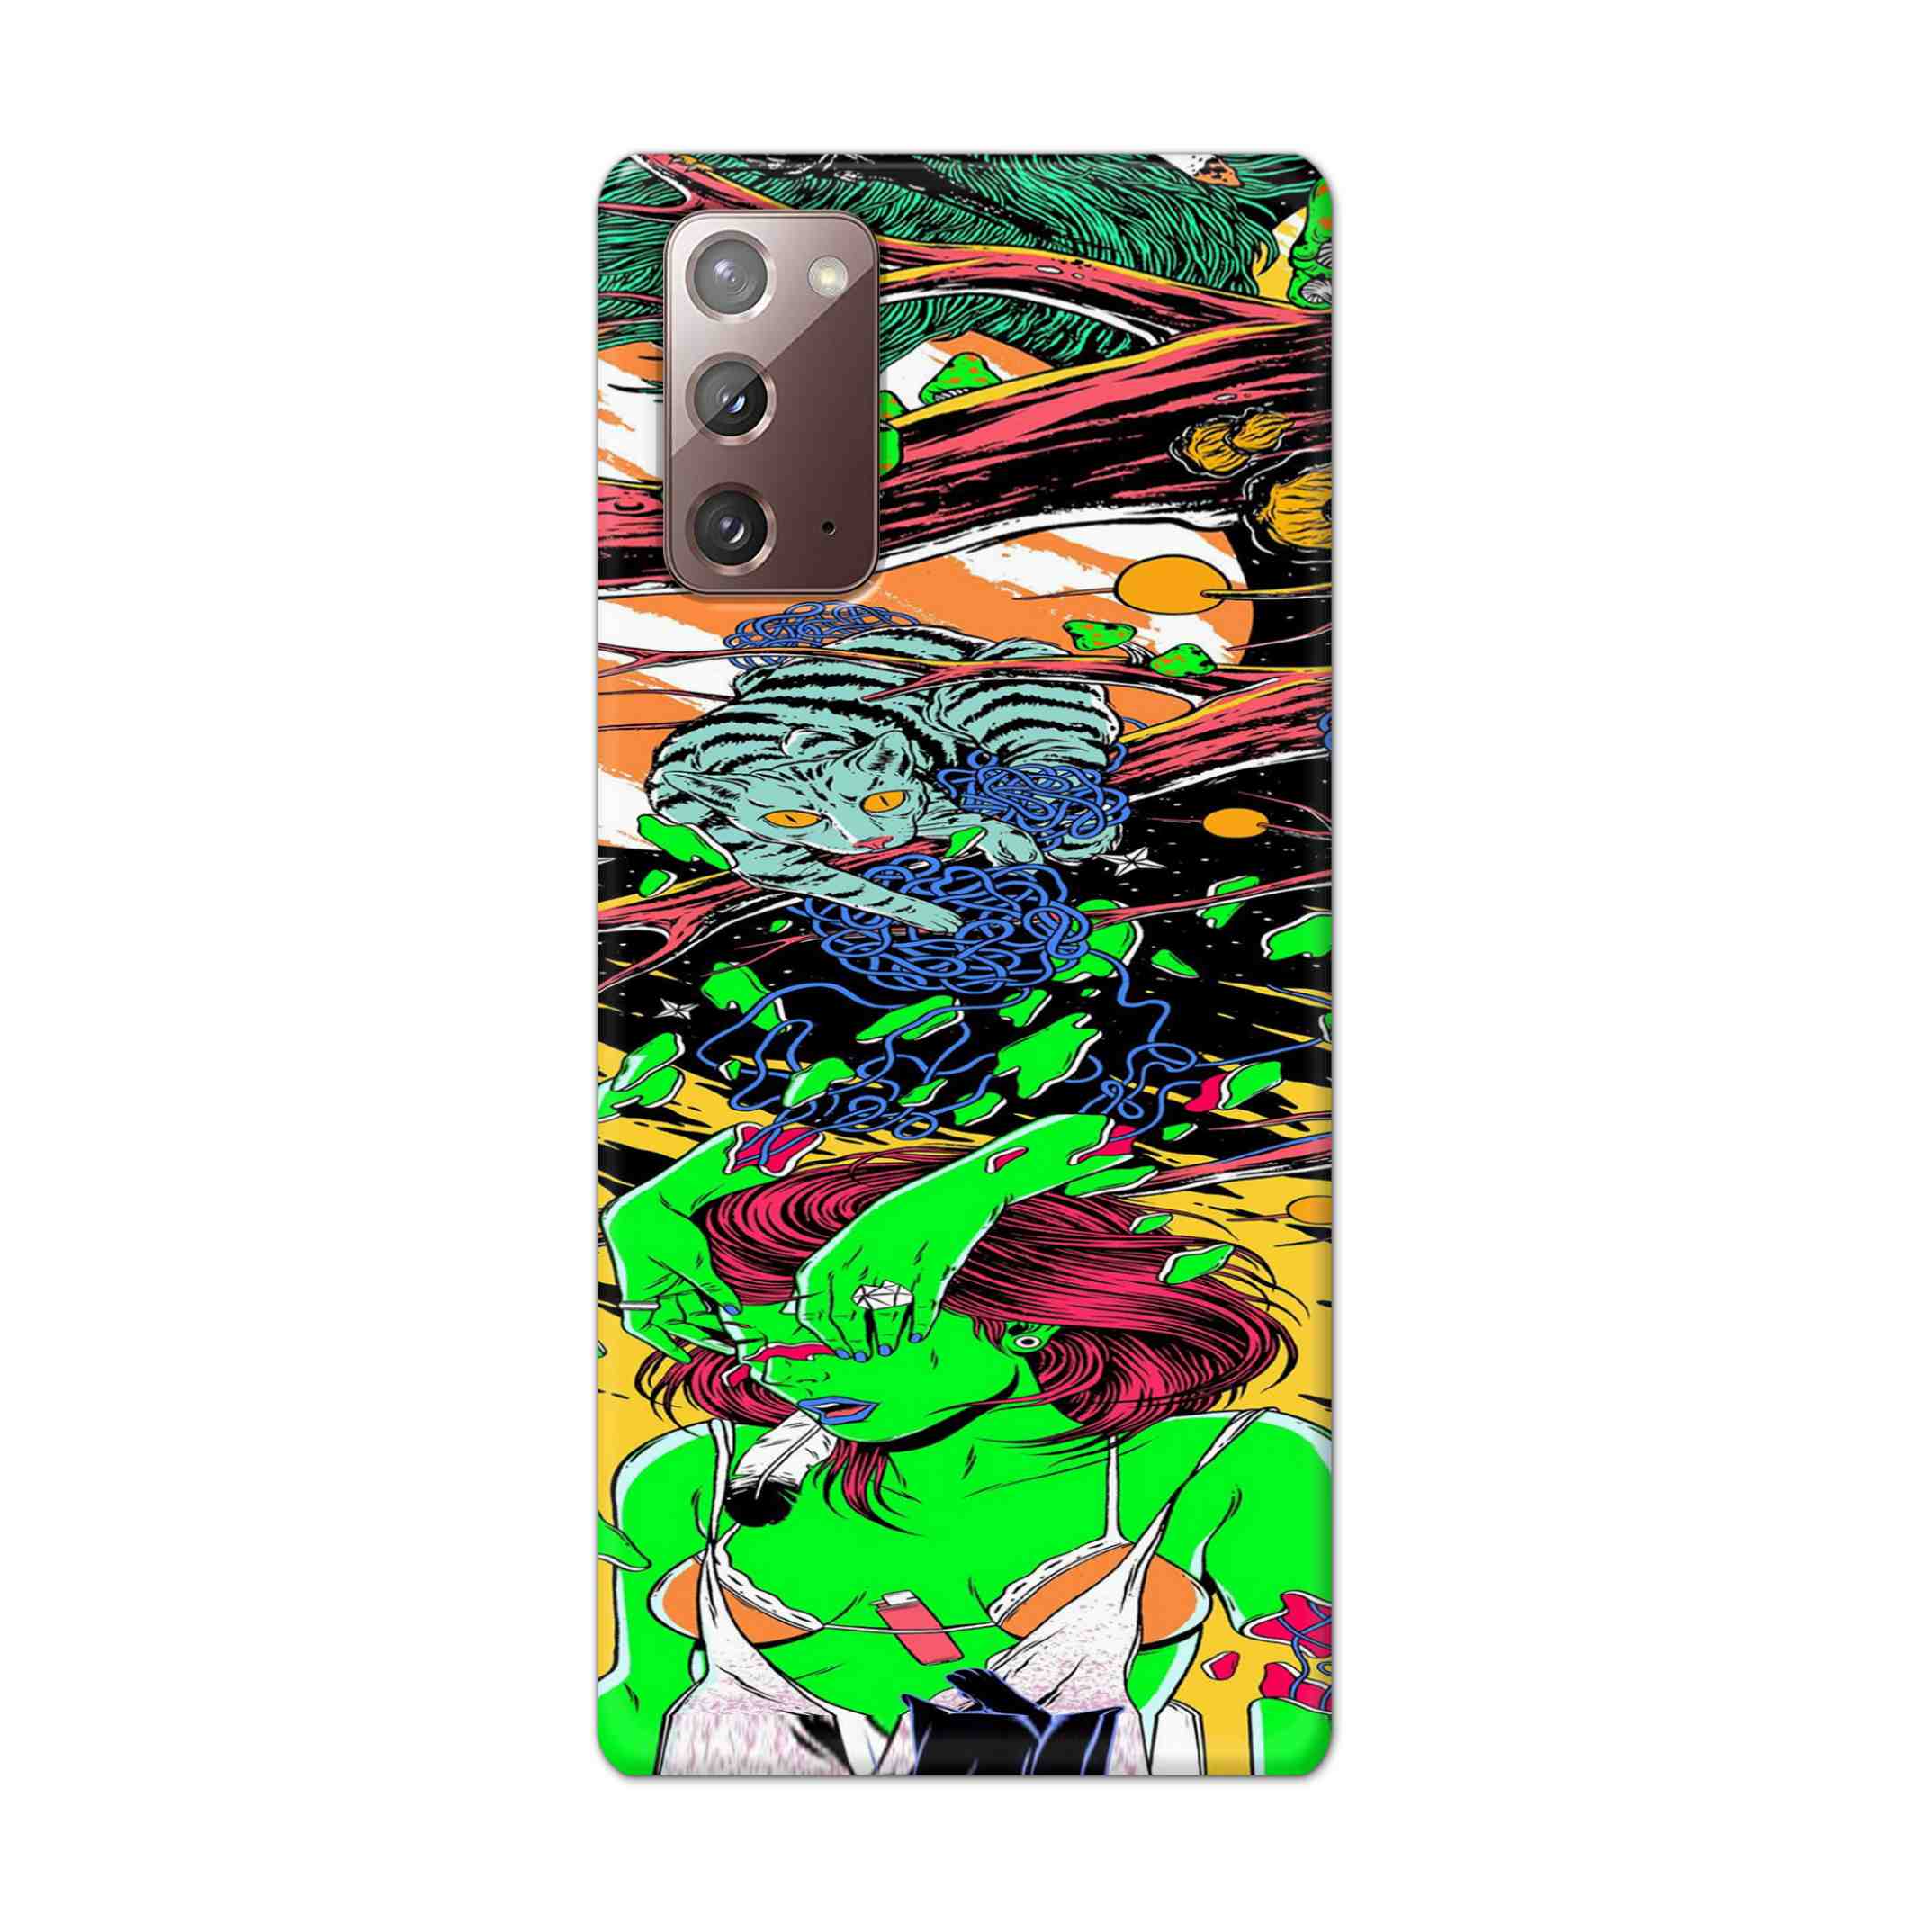 Buy Green Girl Art Hard Back Mobile Phone Case Cover For Samsung Galaxy Note 20 Online